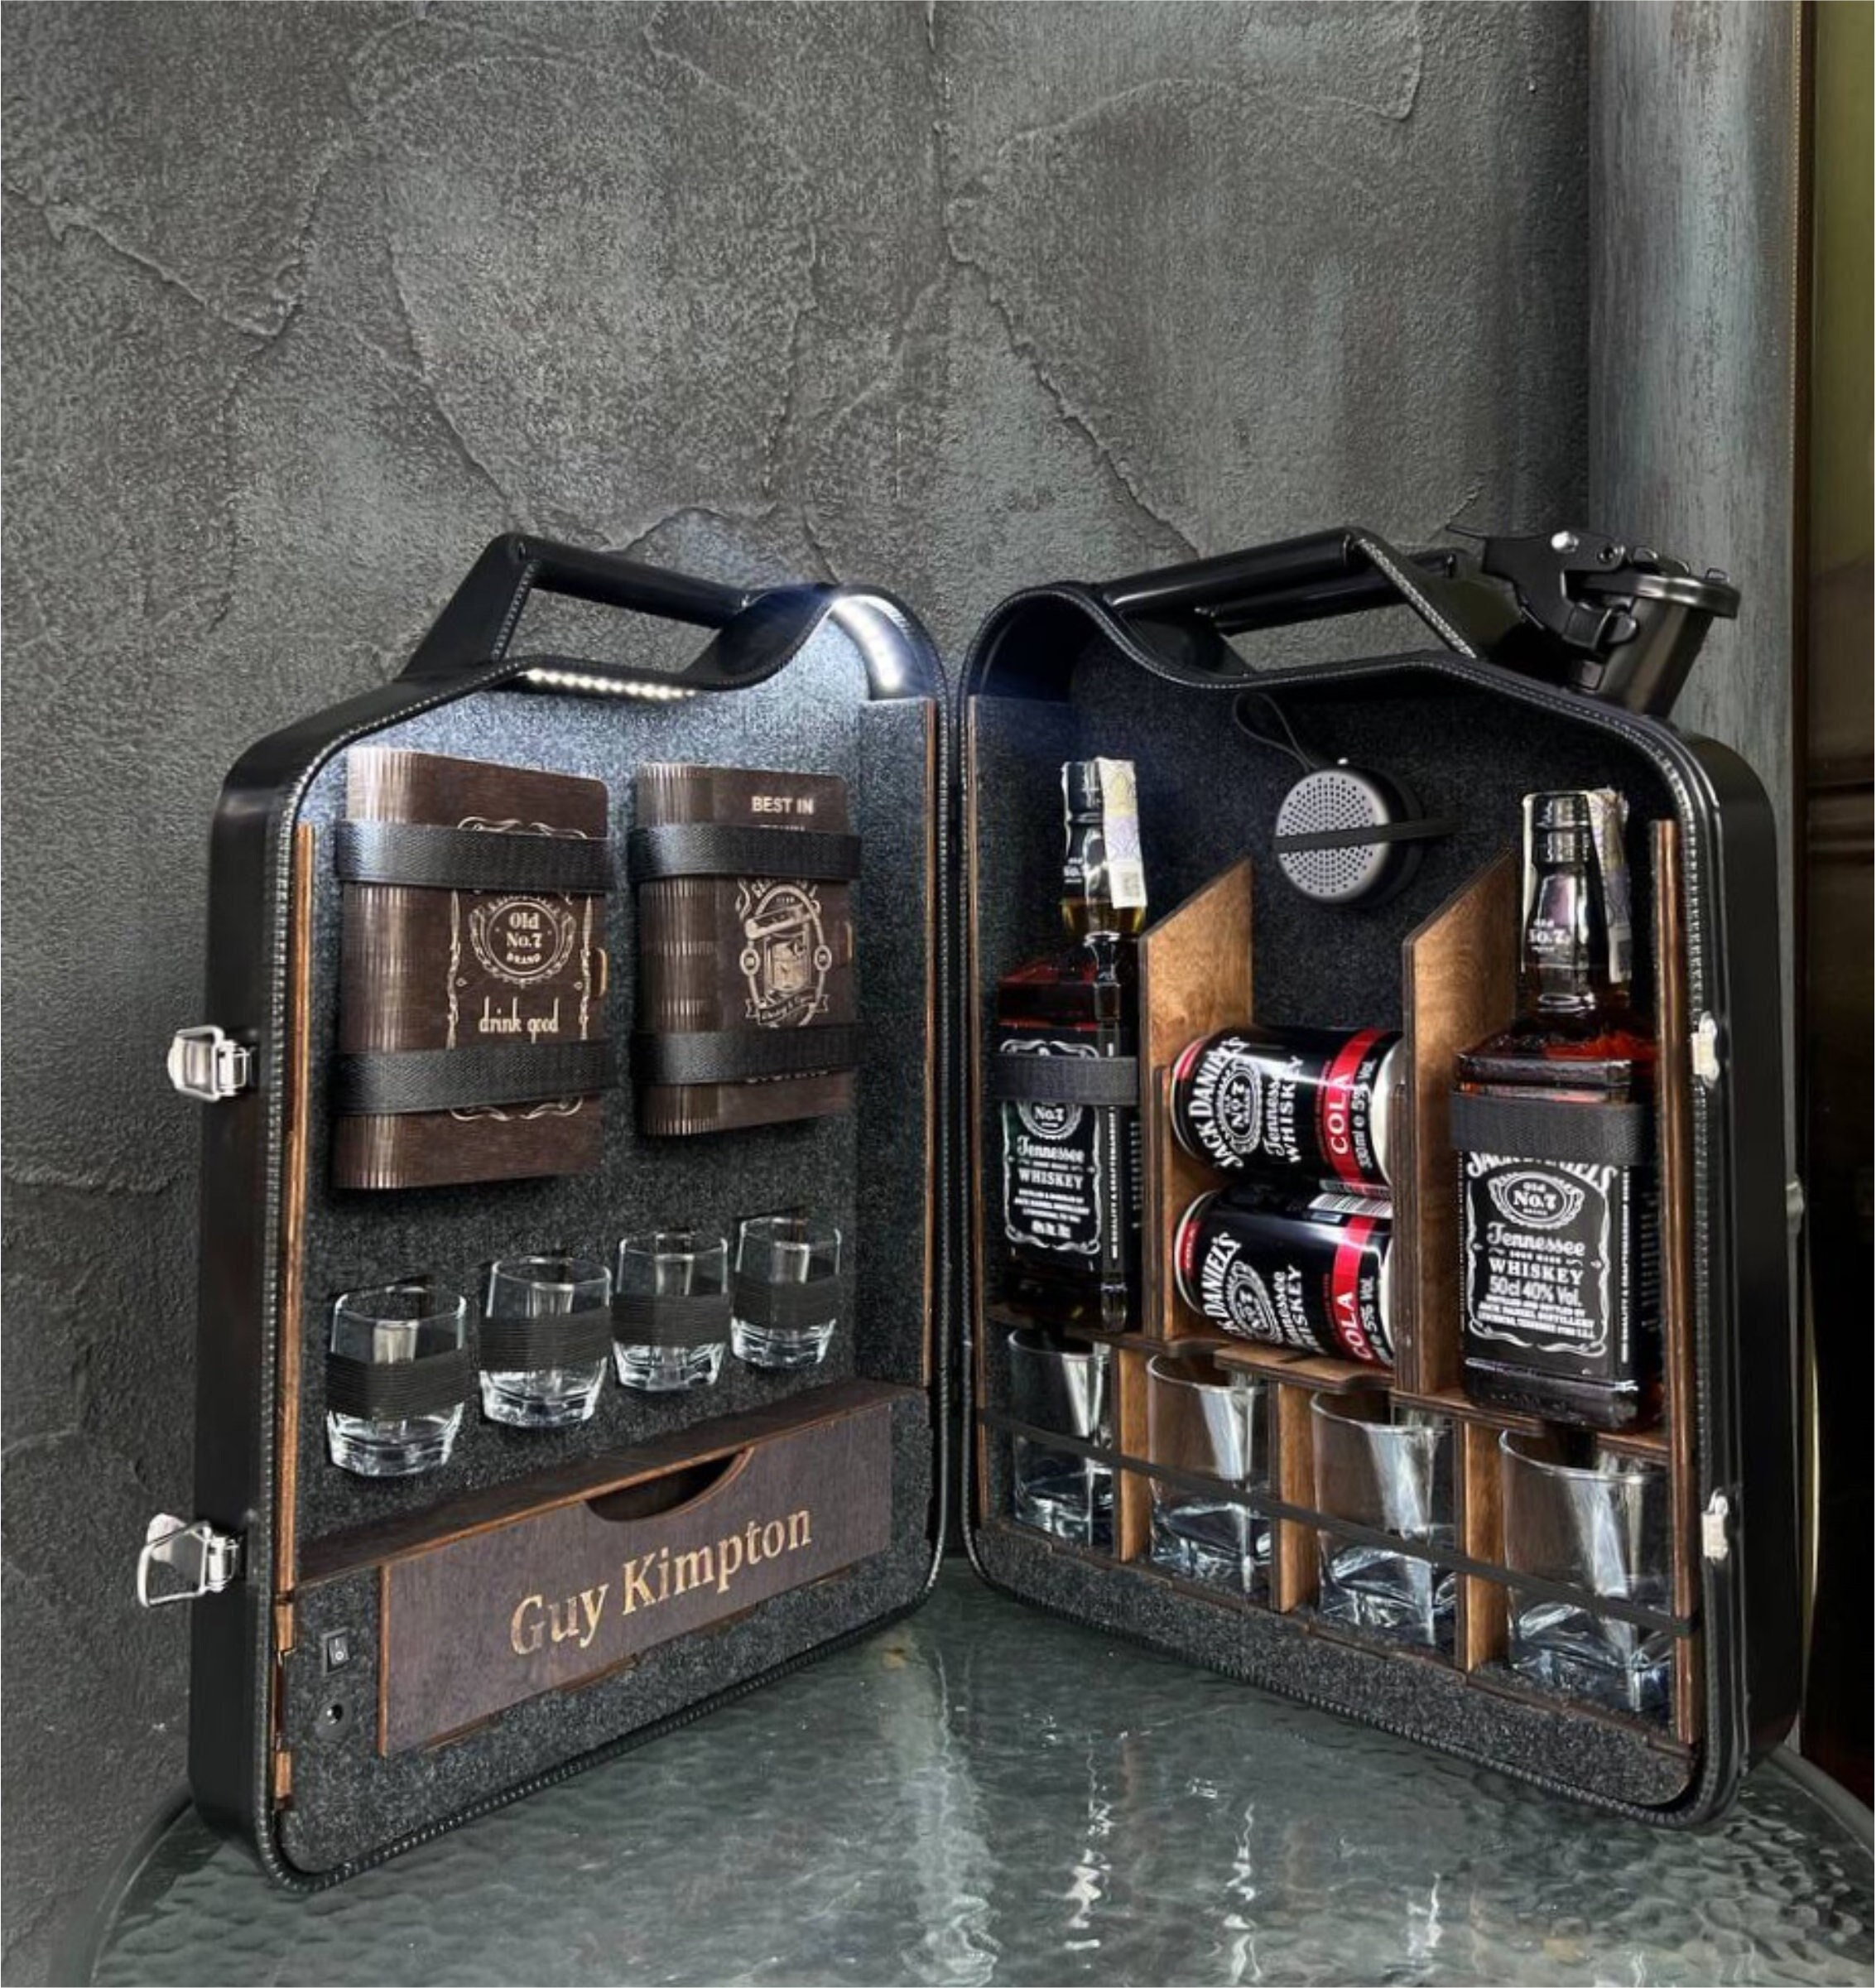 Personalized Whiskey Lover's Jerry Can Minibar With LED Backlight & Drawer  Customized Christmas Gifts -  Israel